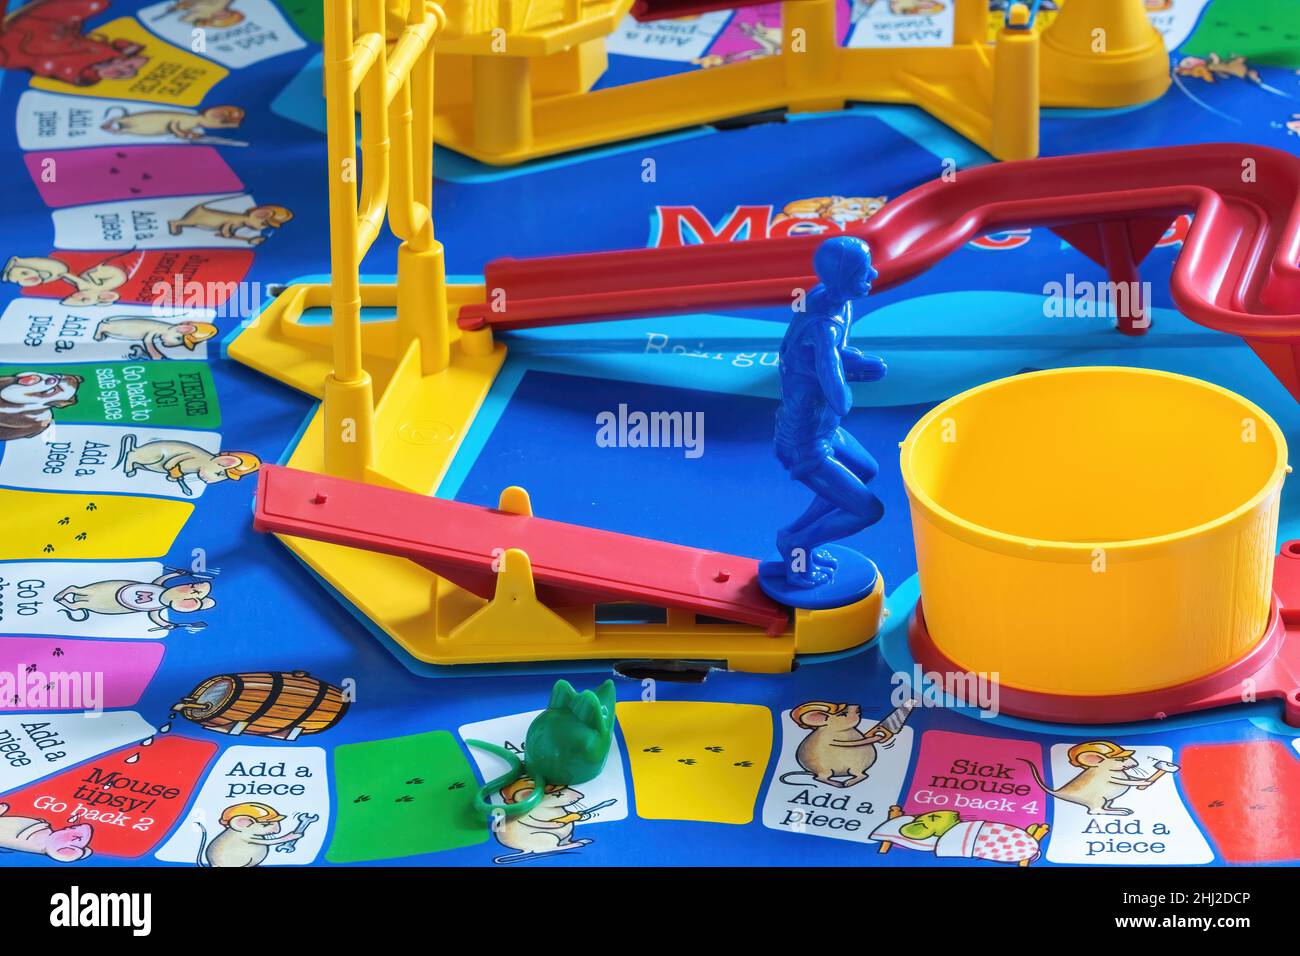 https://c8.alamy.com/comp/2HJ2DCP/close-up-image-of-the-diver-and-mouse-on-mouse-trap-board-gamethe-diver-is-on-the-see-saw-ready-to-dive-into-the-yellow-pool-which-sets-of-the-mouse-2HJ2DCP.jpg